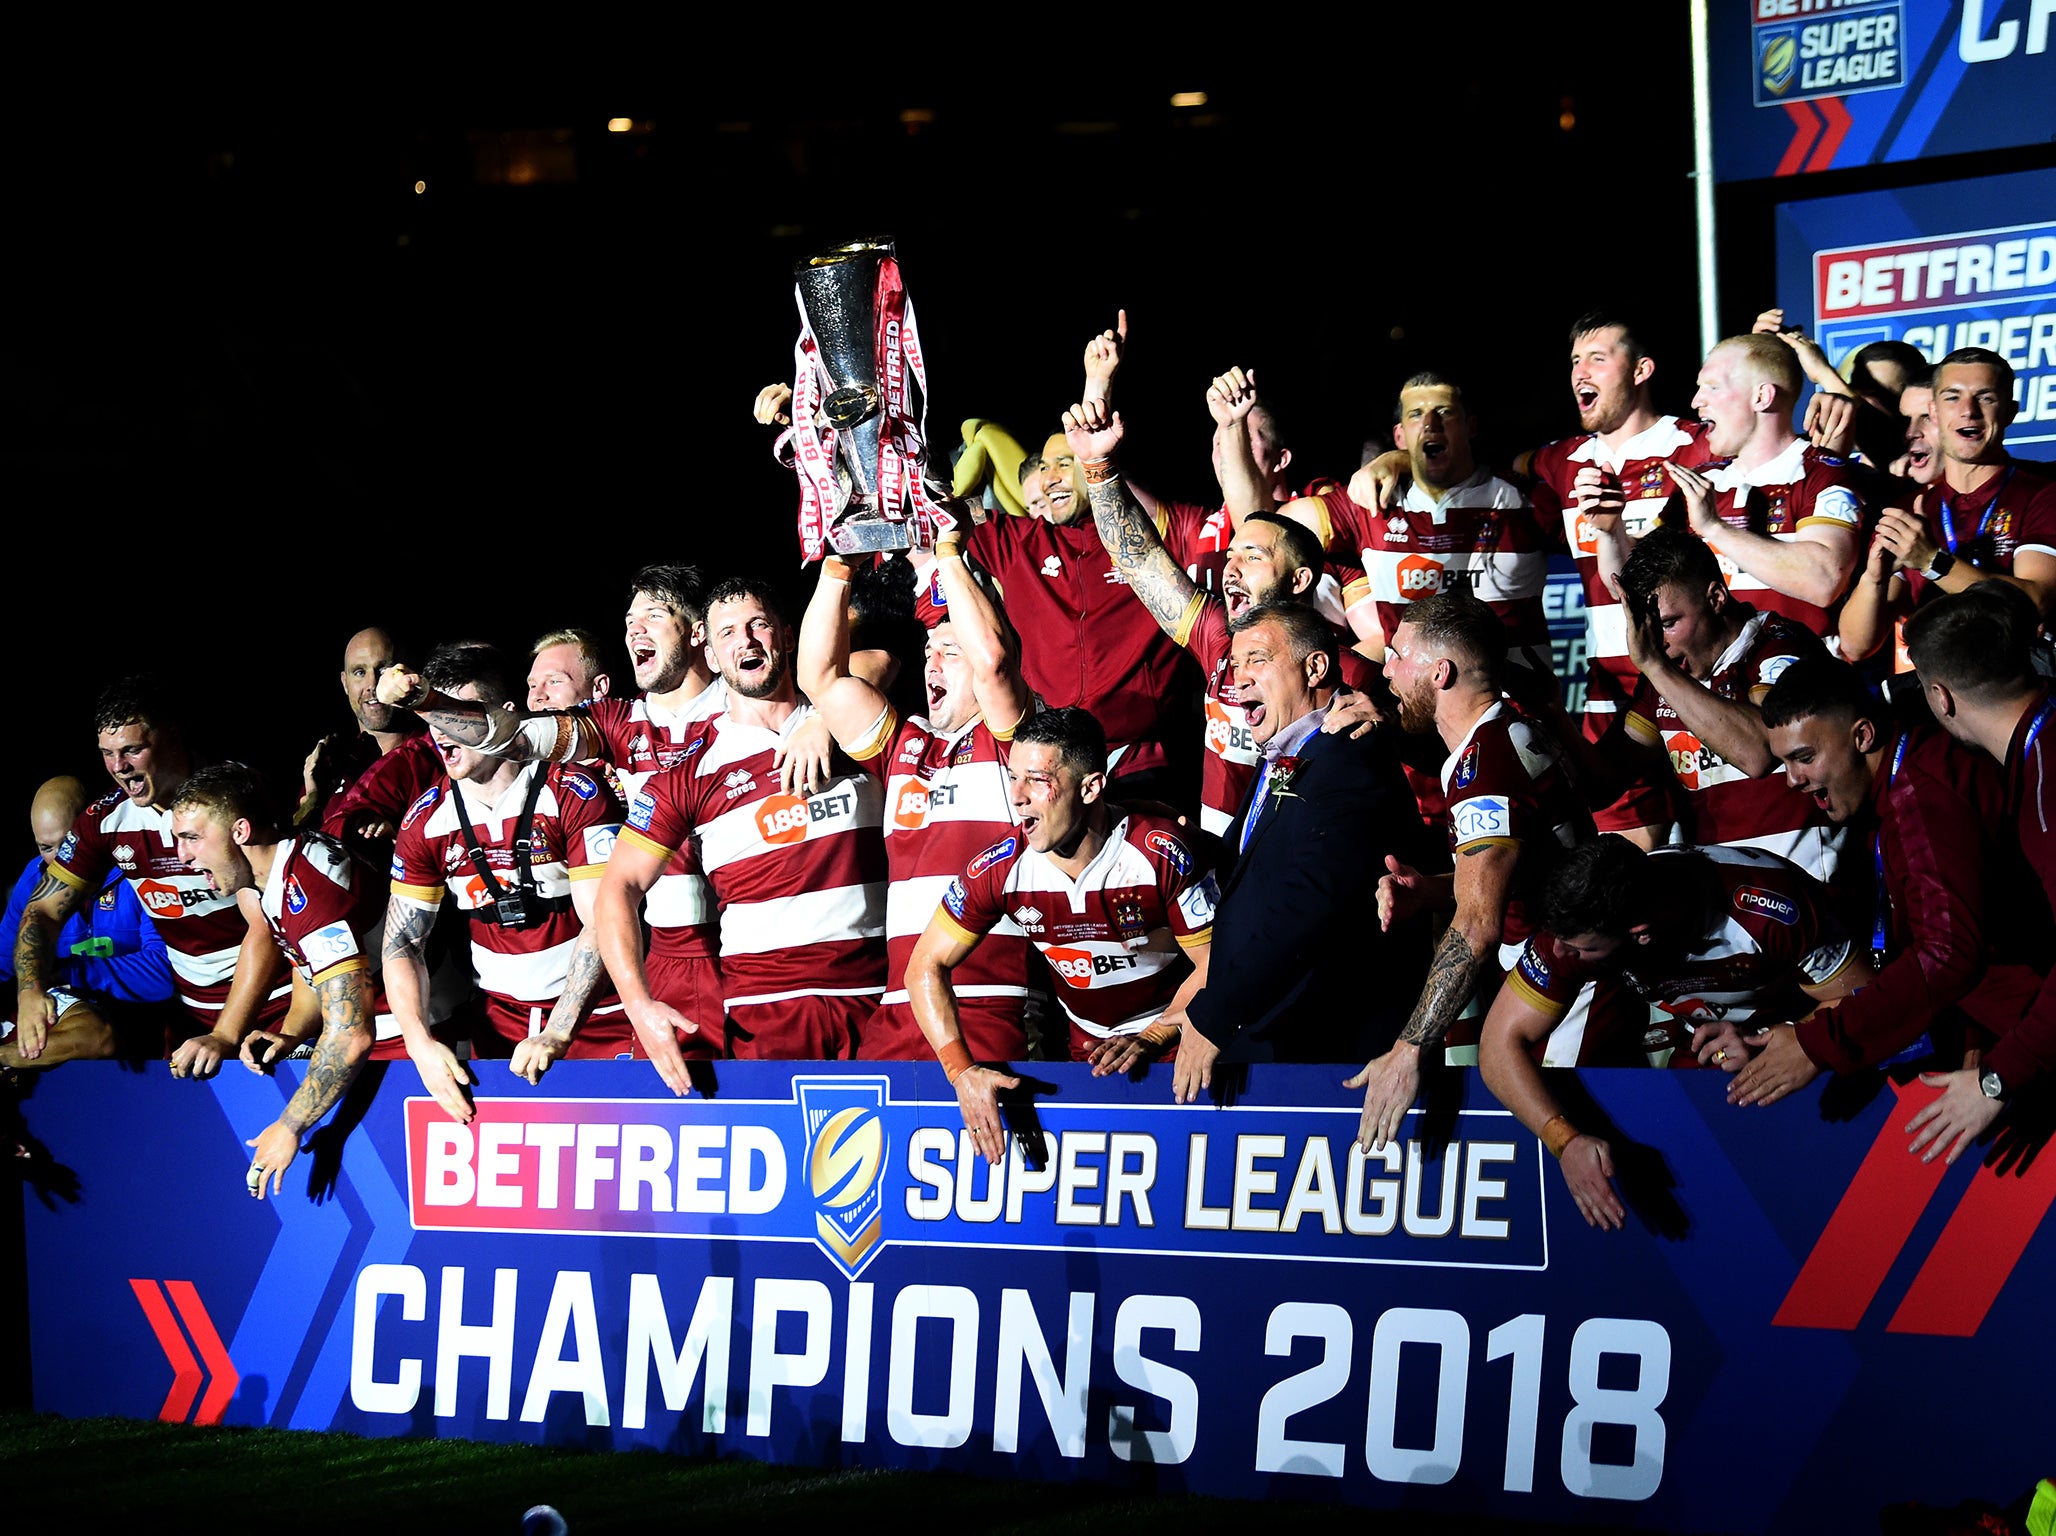 The Roosters take on Super League winners Wigan